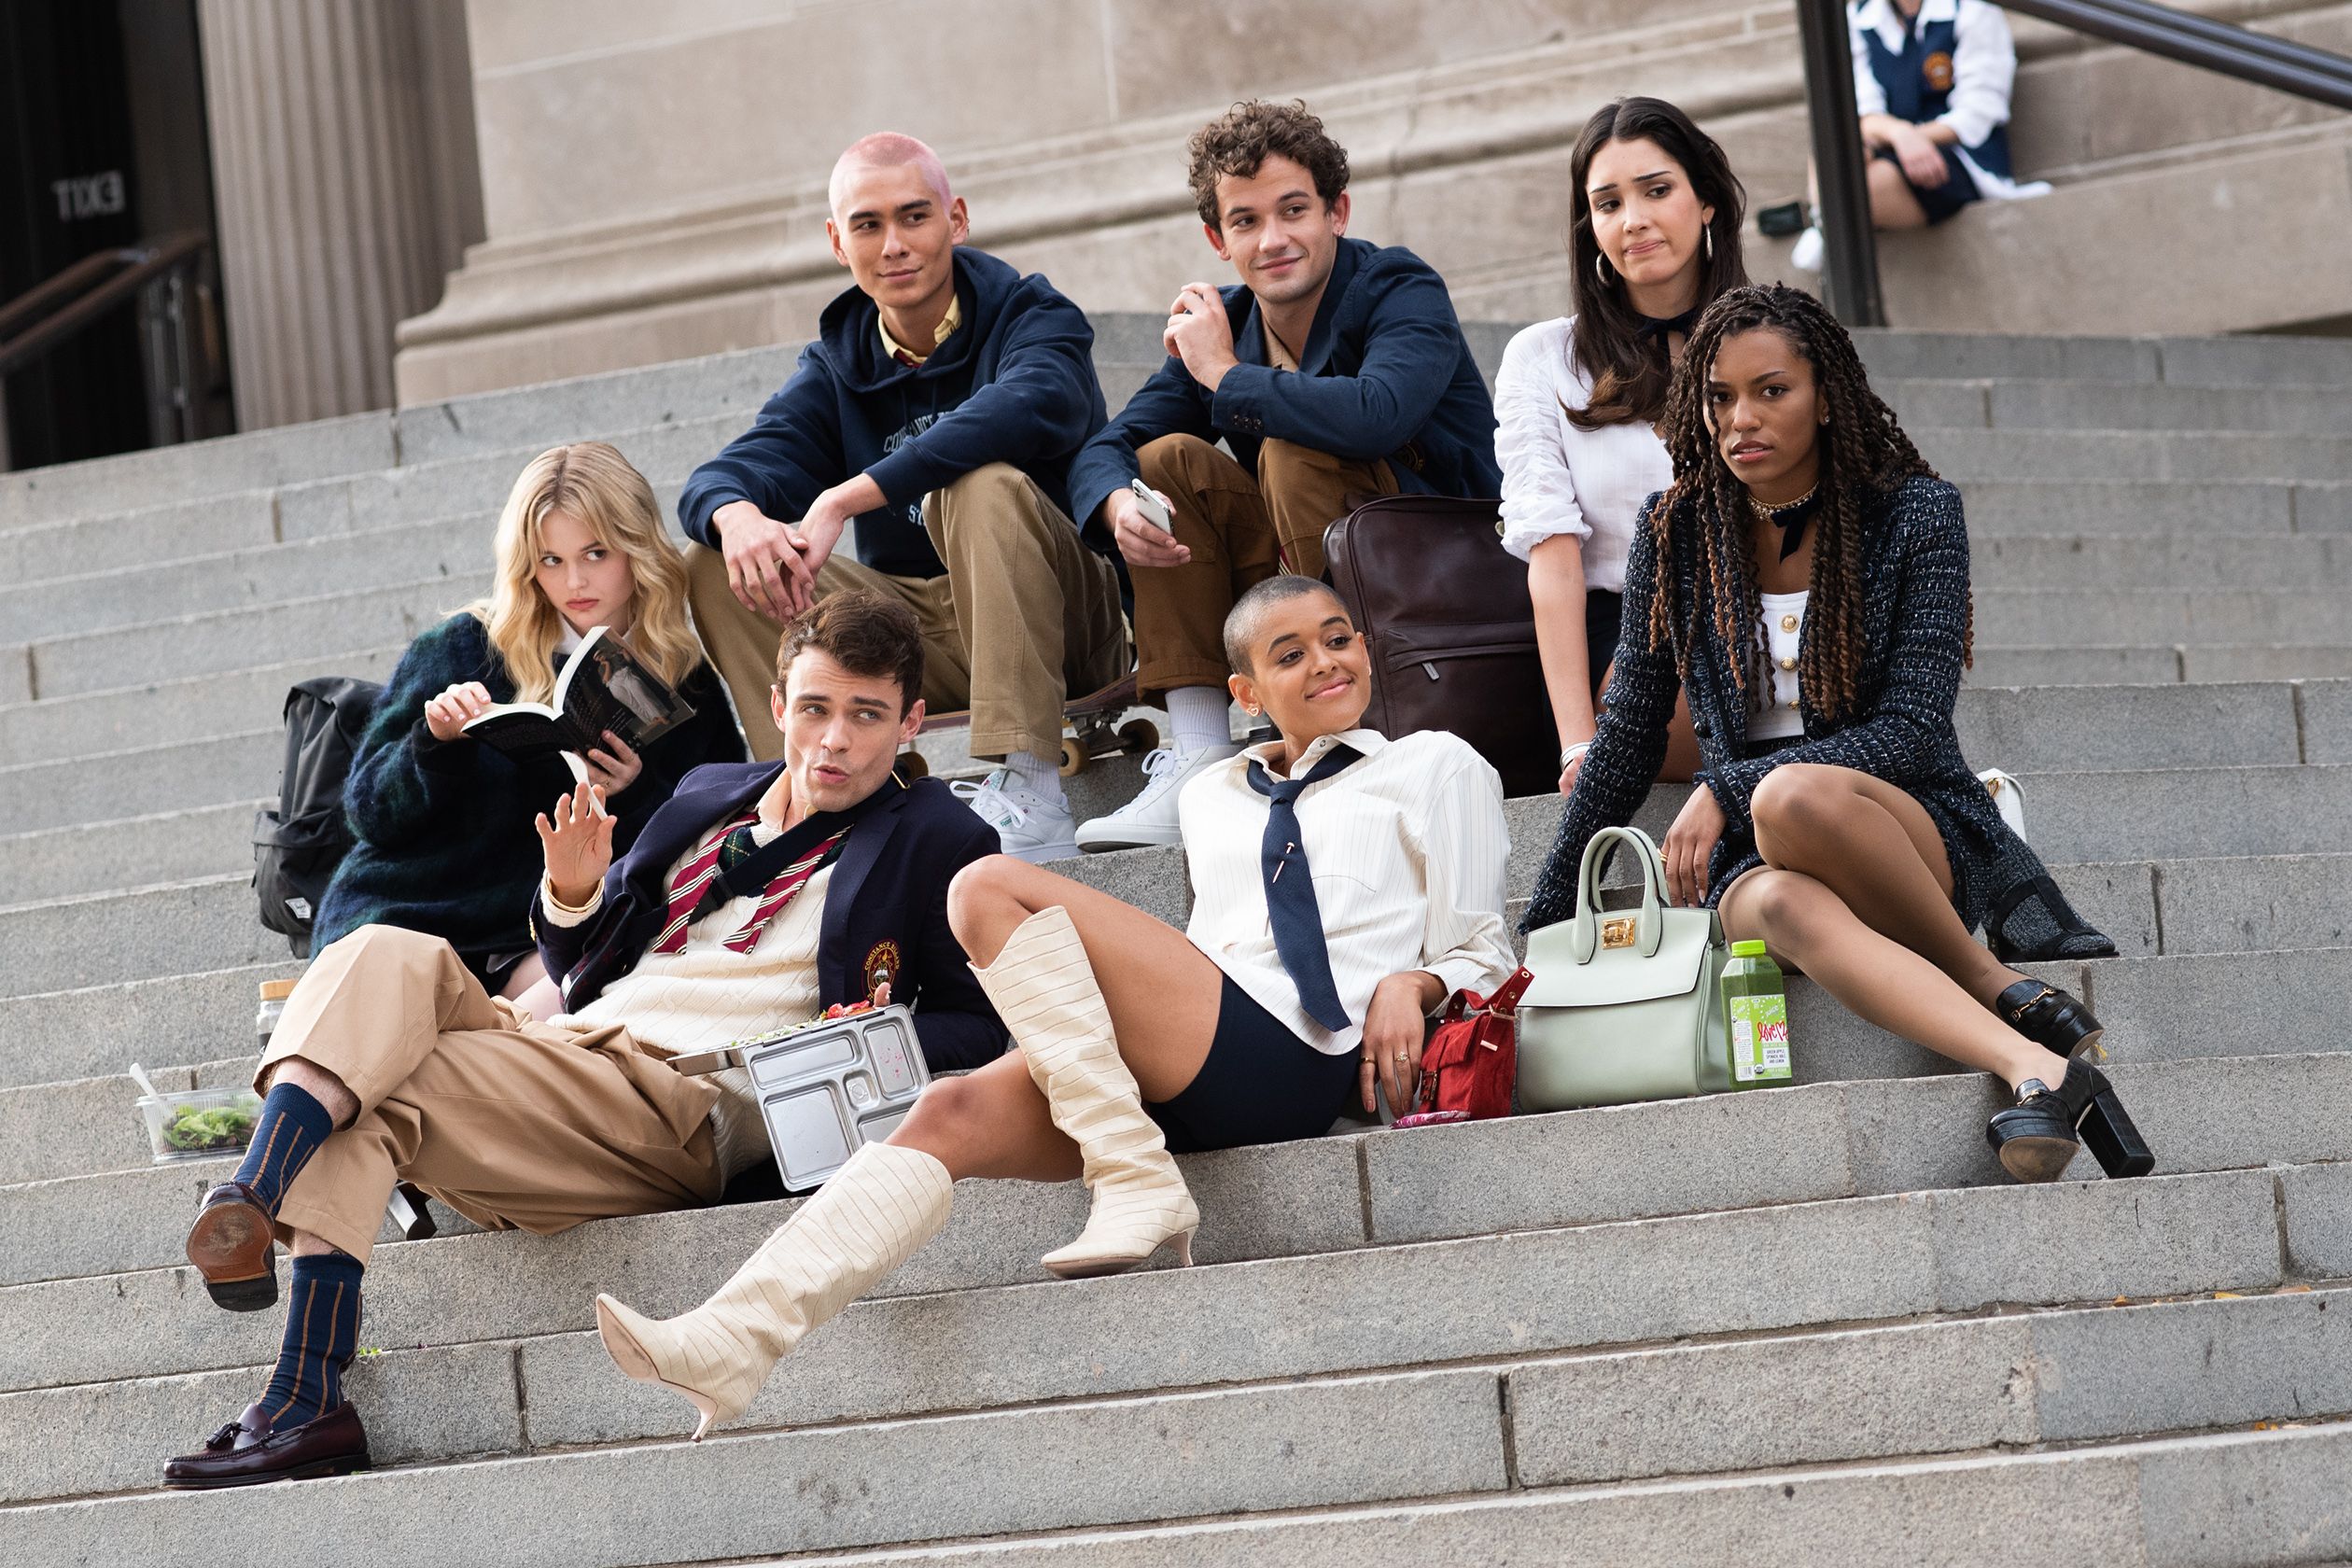 Does The Gossip Girl Reboot Meet Our Fashion Expectations? - TUC